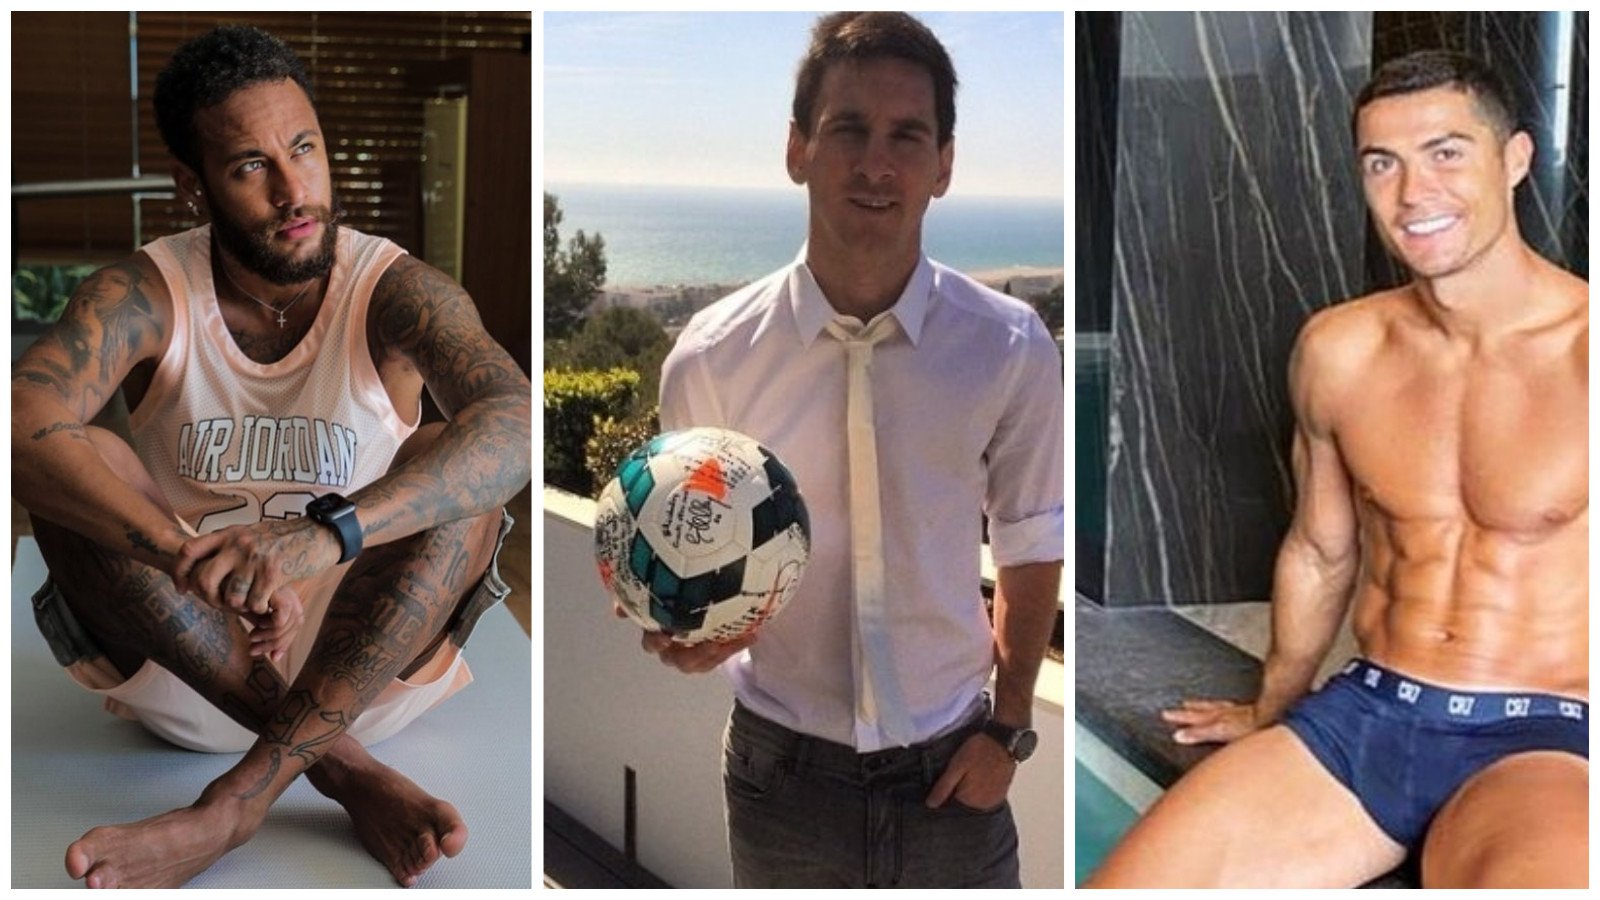 Football’s richest players Neymar, Lionel Messi and Cristiano Ronaldo live it up in luxury mansions. 
Photos: @neymarjr, @leomessi, @cristiano/Instagram